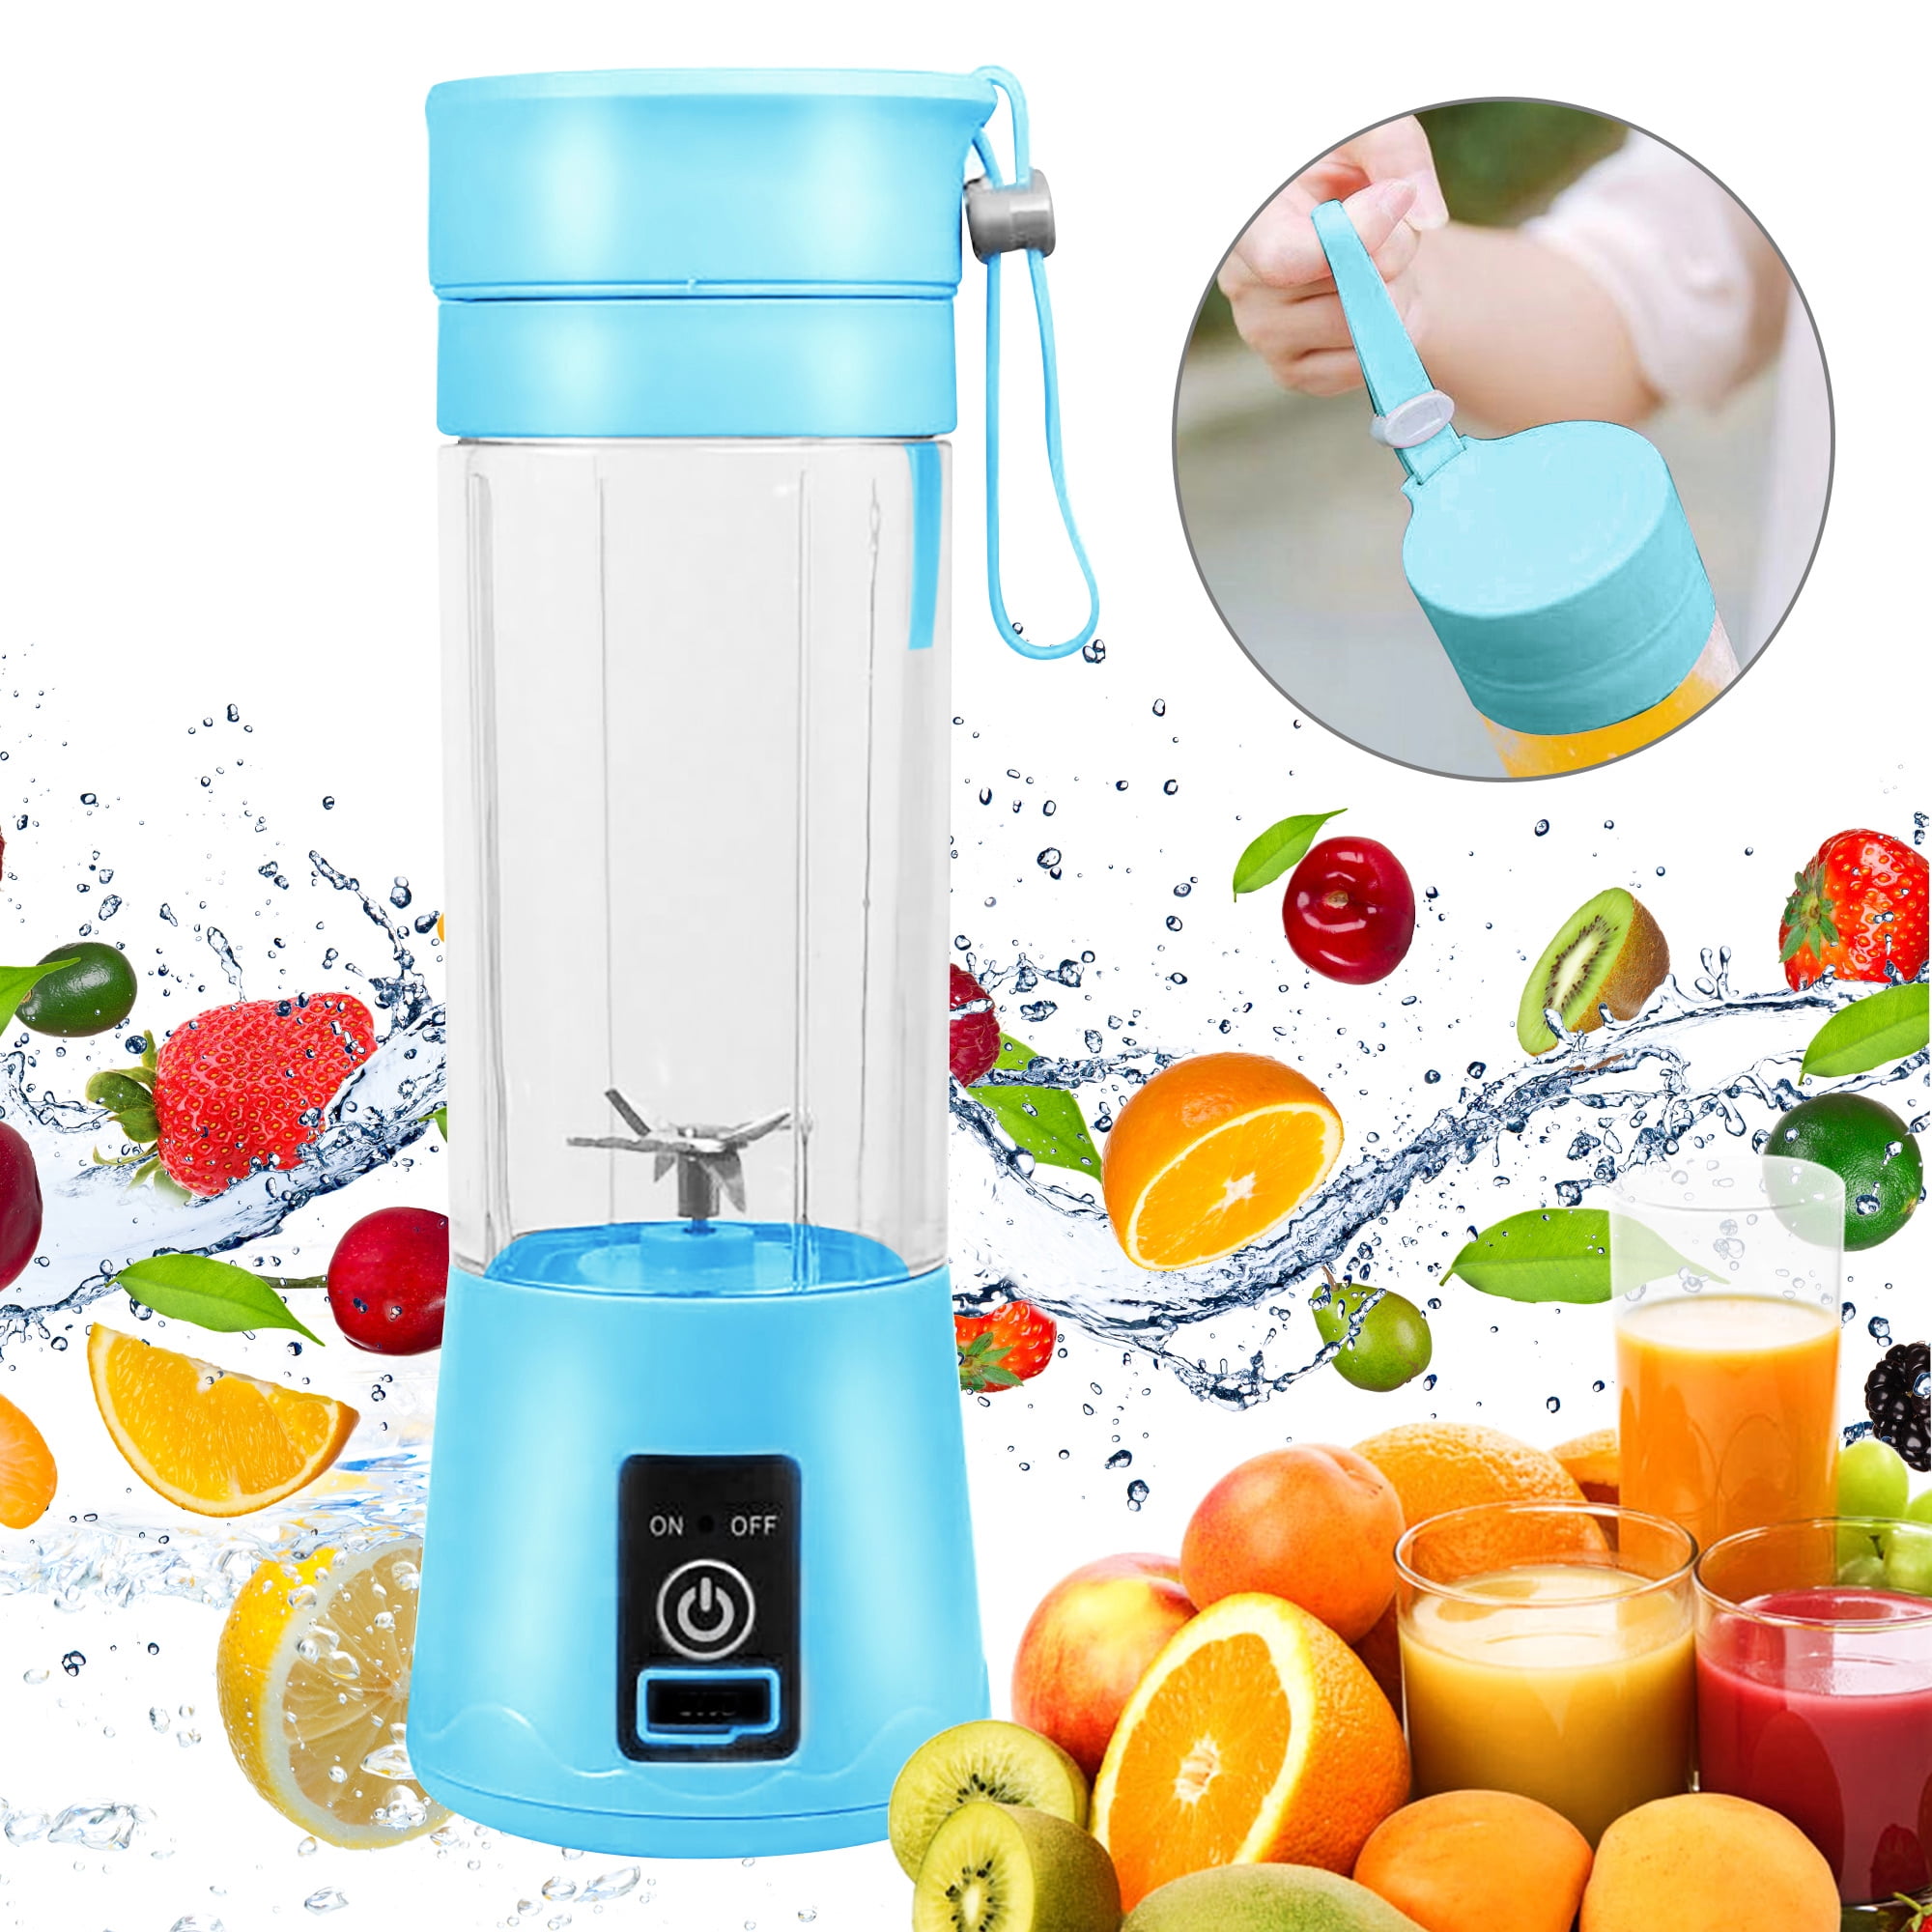 YouLoveIt Juicer Cup 380ML Personal Blender Travel Fruit Juicer Mixer Cup Small Electric Safety Individual Blender Baby Food Mixing Machince with Updated 6 Blades - Walmart.com